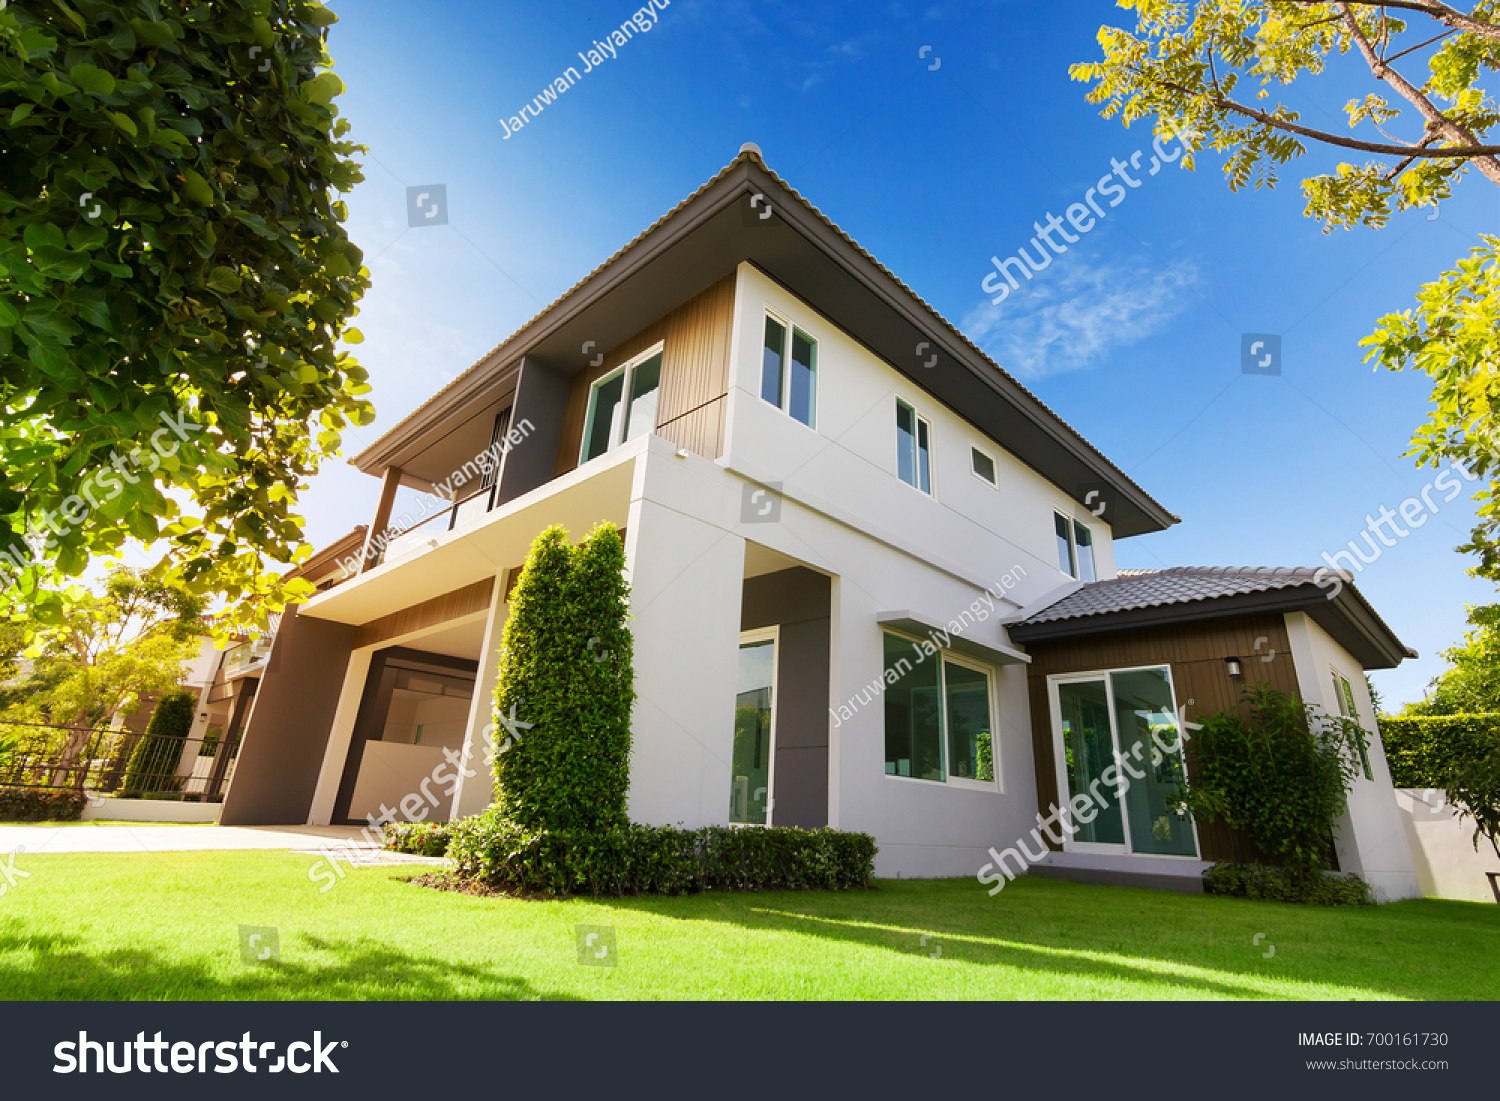 Exterior view of house with green grass.Home For Sale,Rent,Housing and Real Estate concept. #700161730